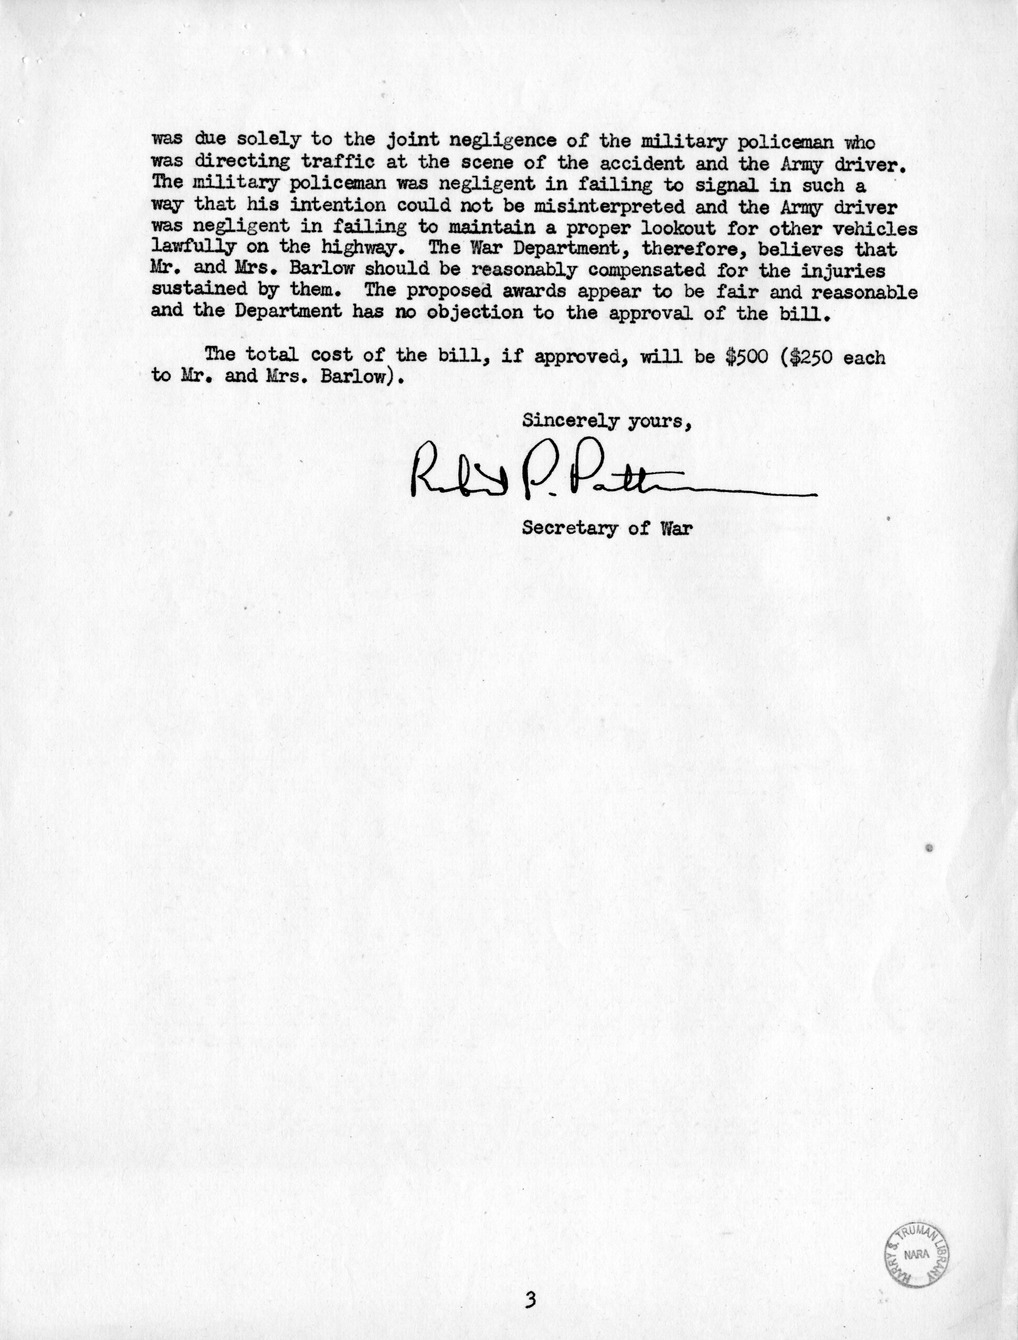 Memorandum from Frederick J. Bailey to M. C. Latta, S. 1023, For the Relief of Mr. and Mrs. Ernest L. Barlow, with Attachments